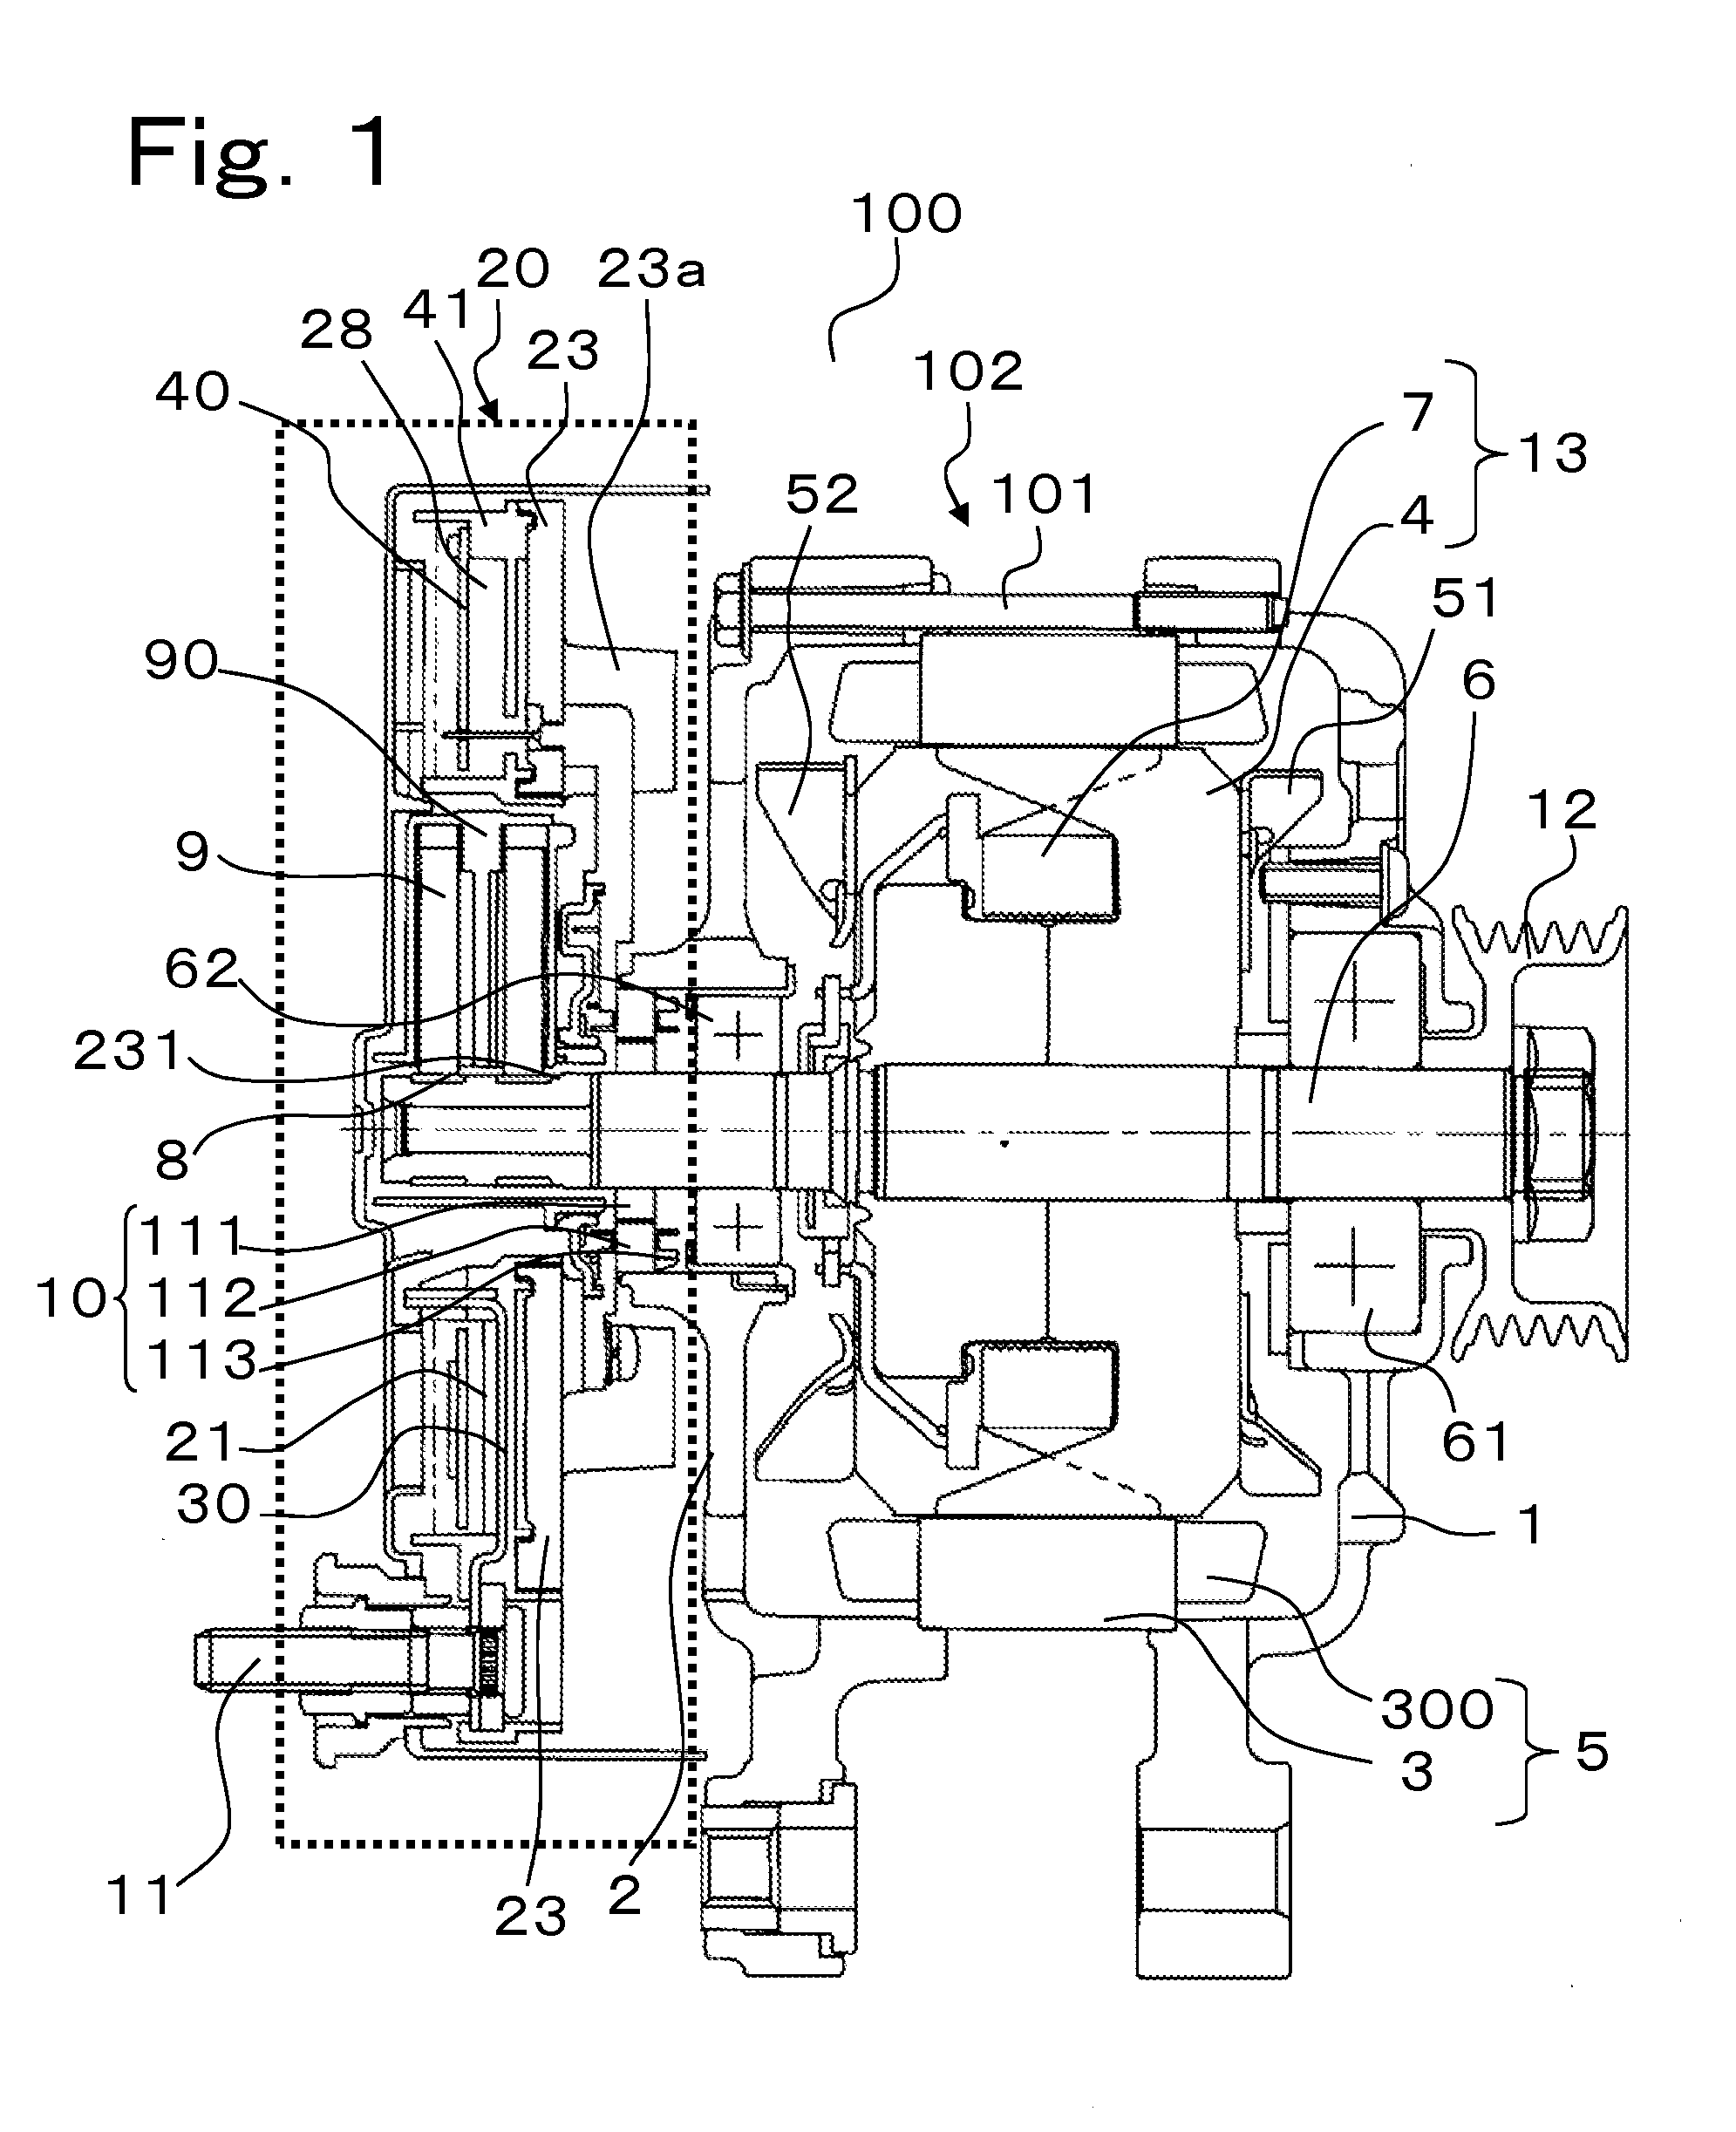 Controller-integrated rotary electric machine